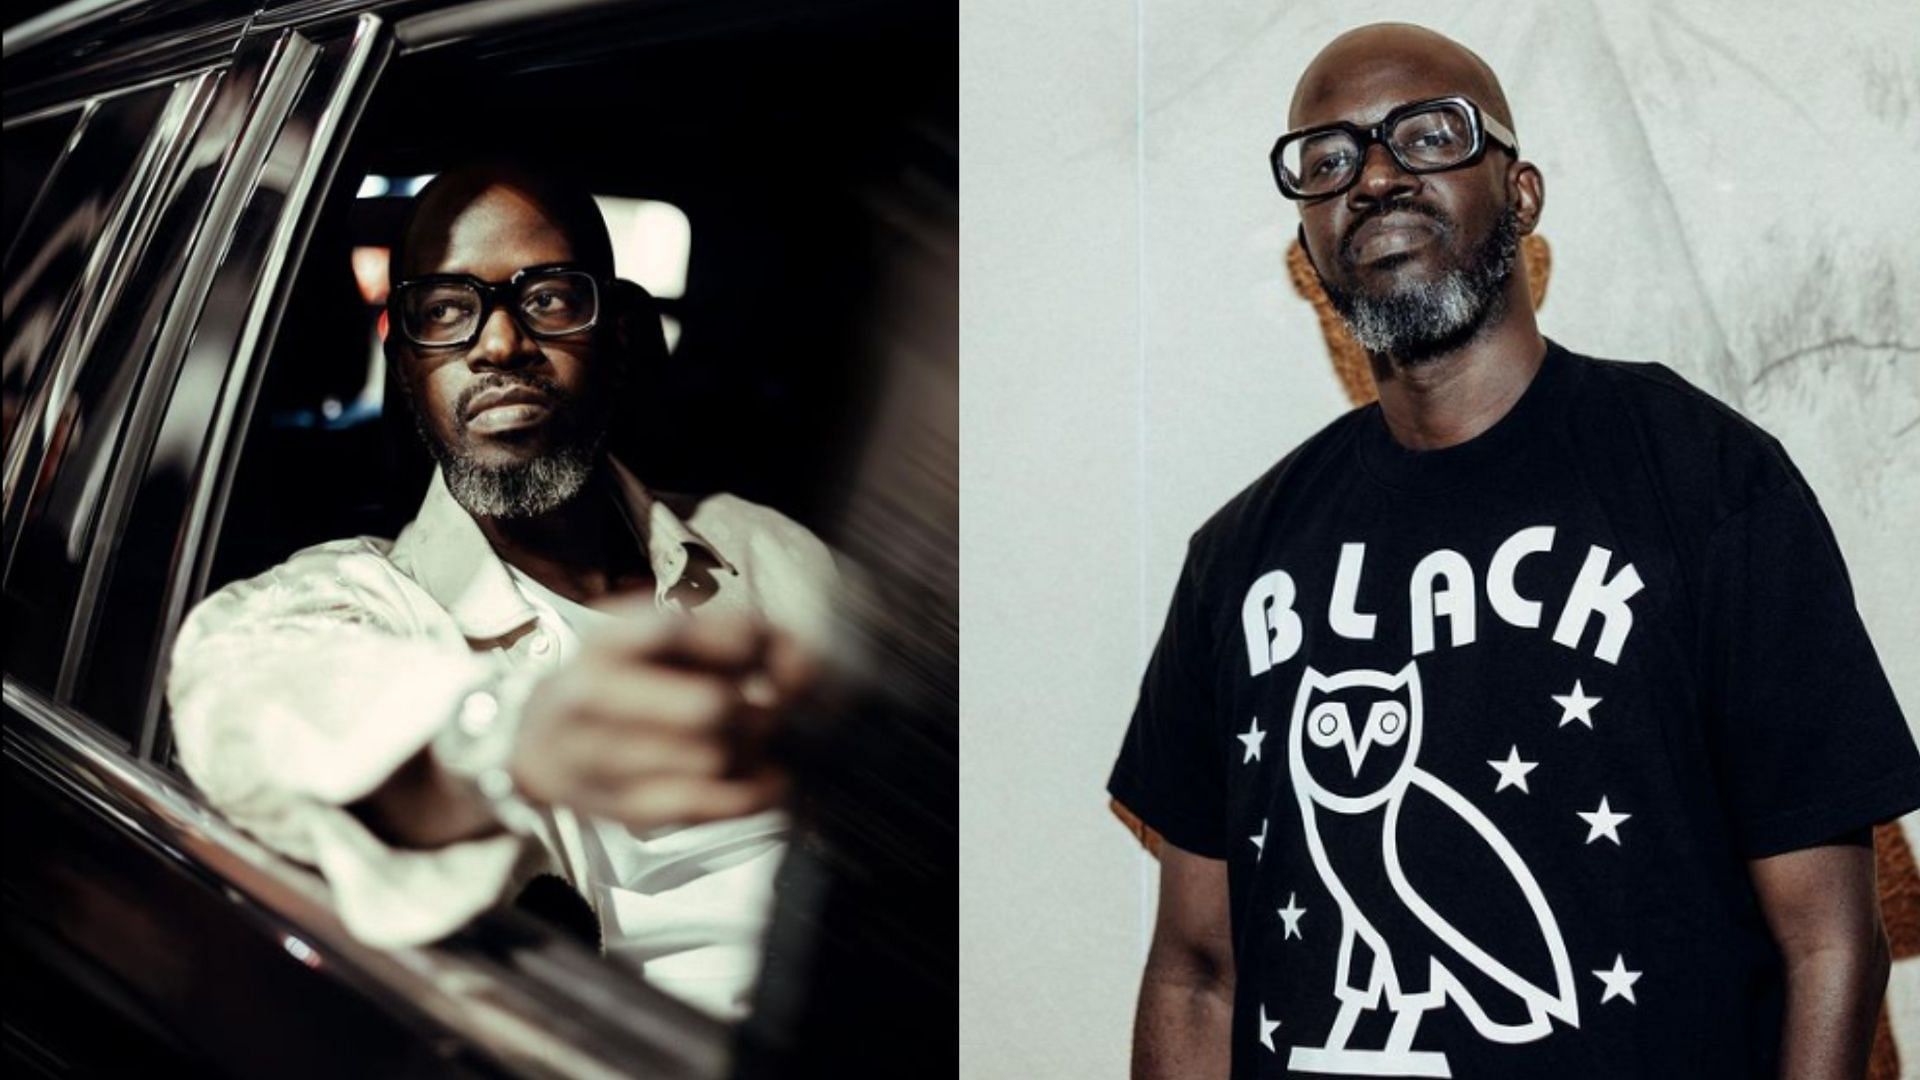 Music producer Black Coffee gets involved in a serious travel accident (Image via realblackcoffee/Instagram)